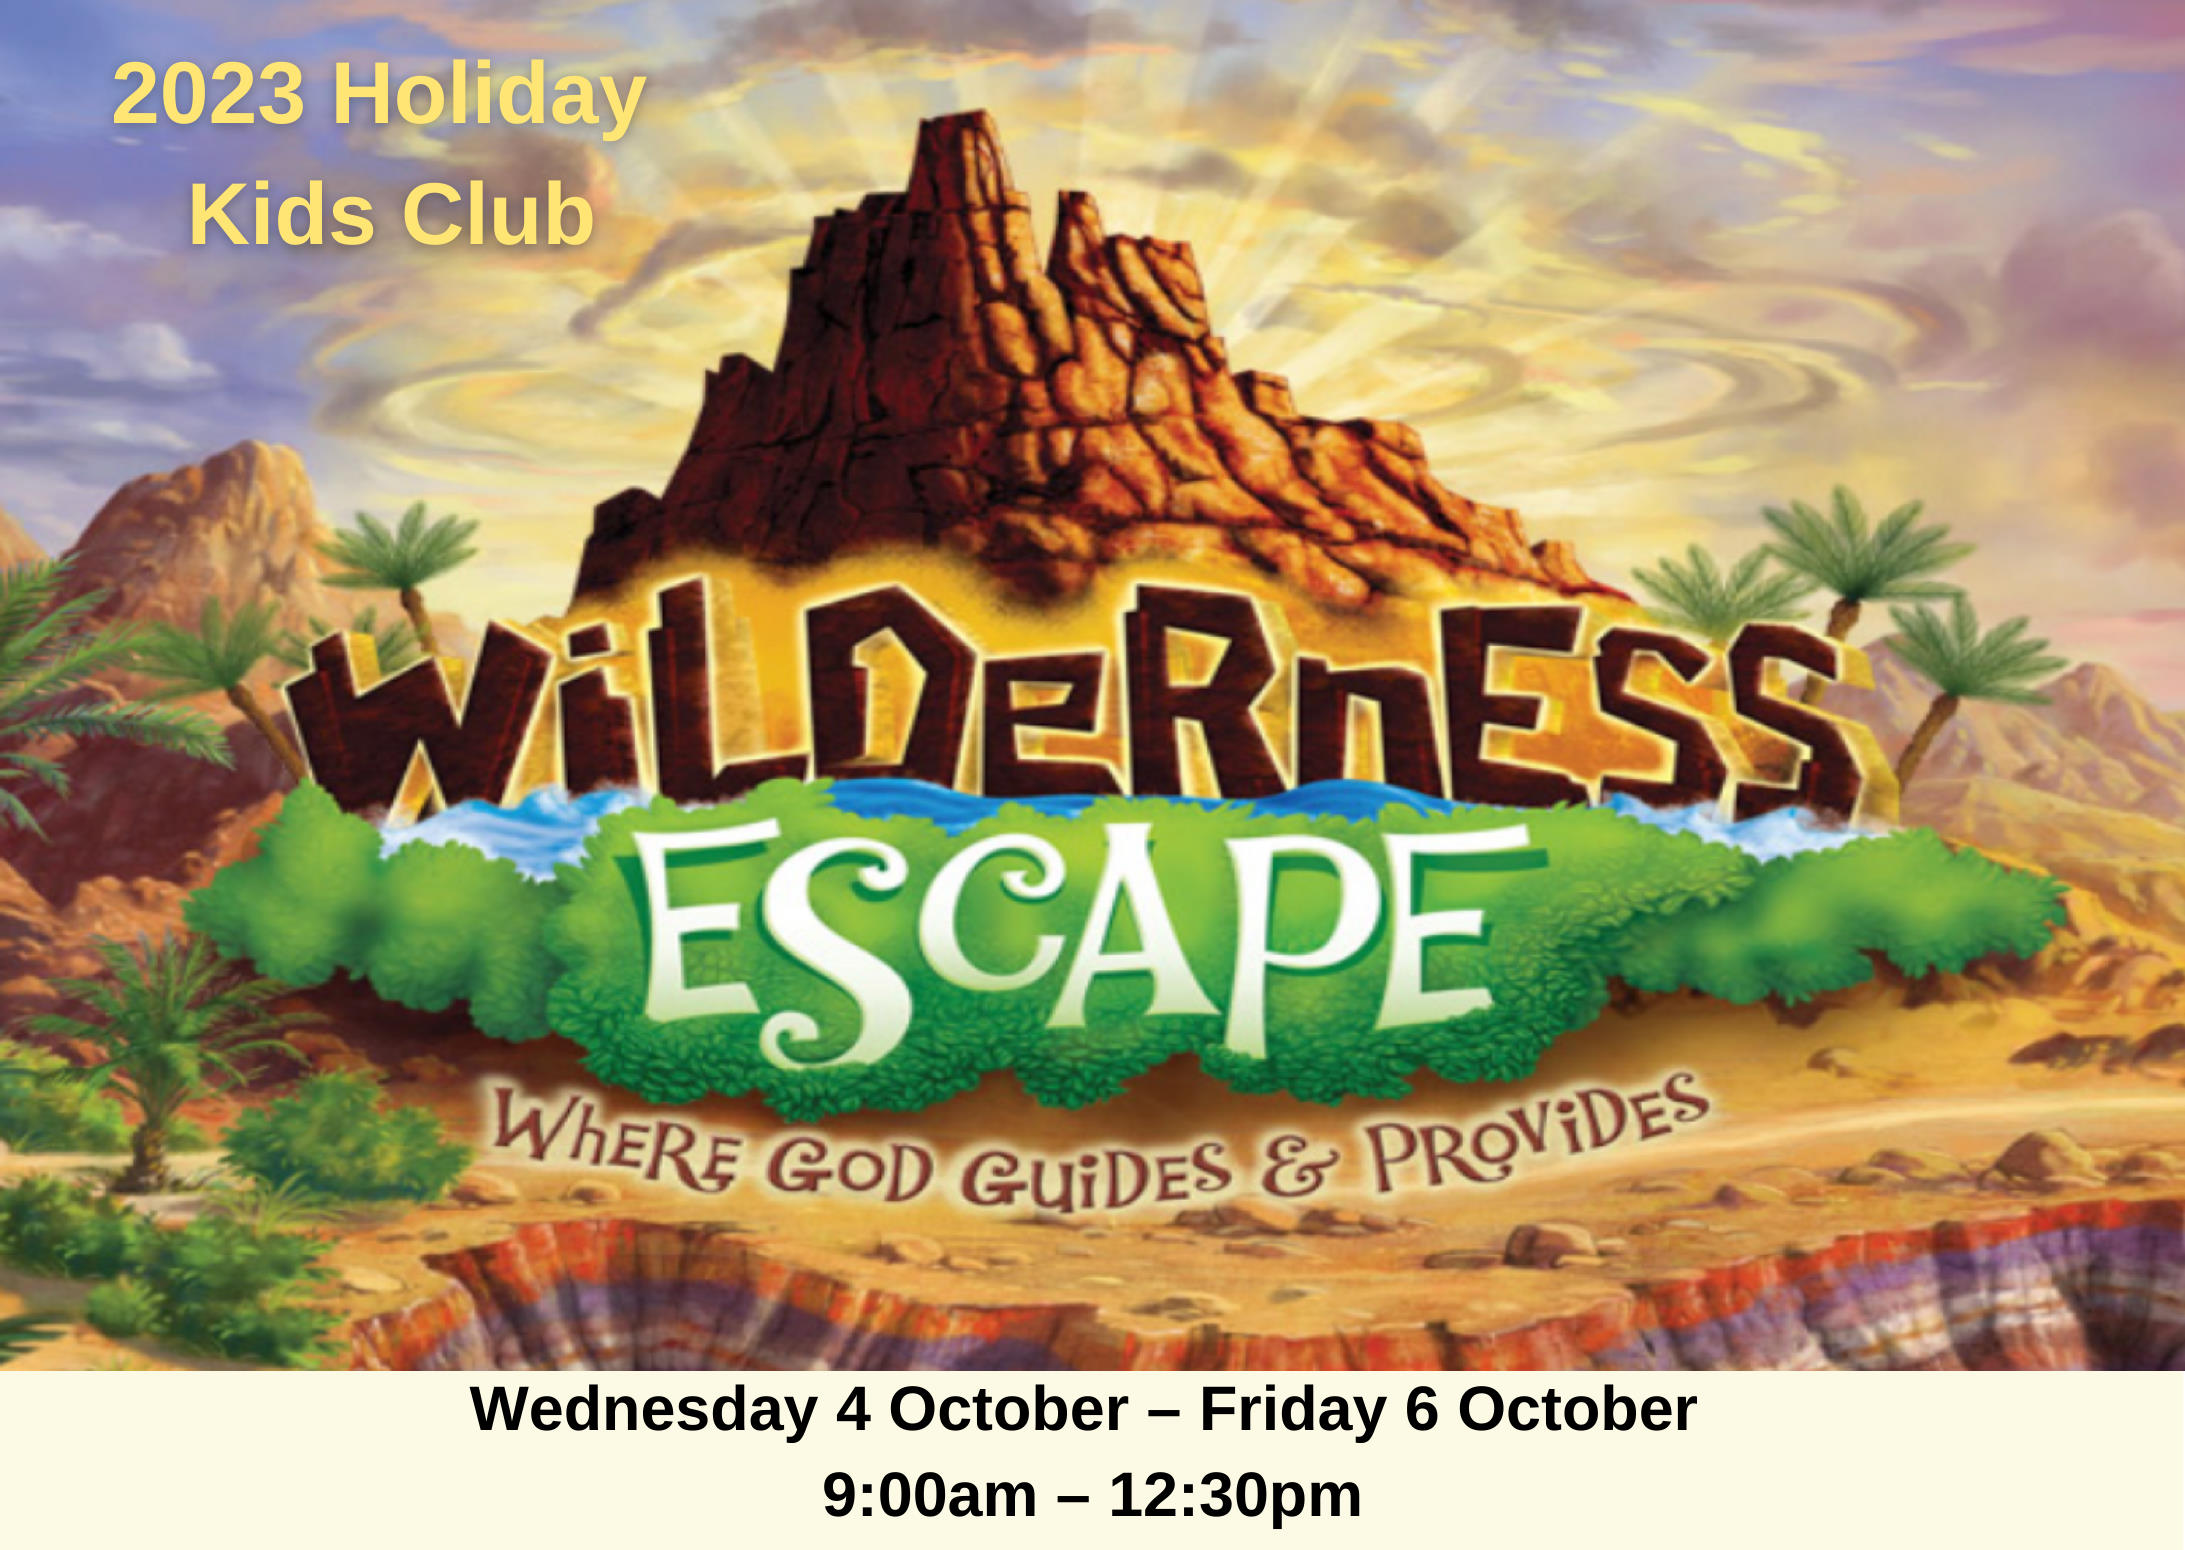 Holiday Kids Club. Wilderness Escape - Where God Guides & Provides. Wednesday 4th October - Friday 6th October. 9:00am - 12:30pm.